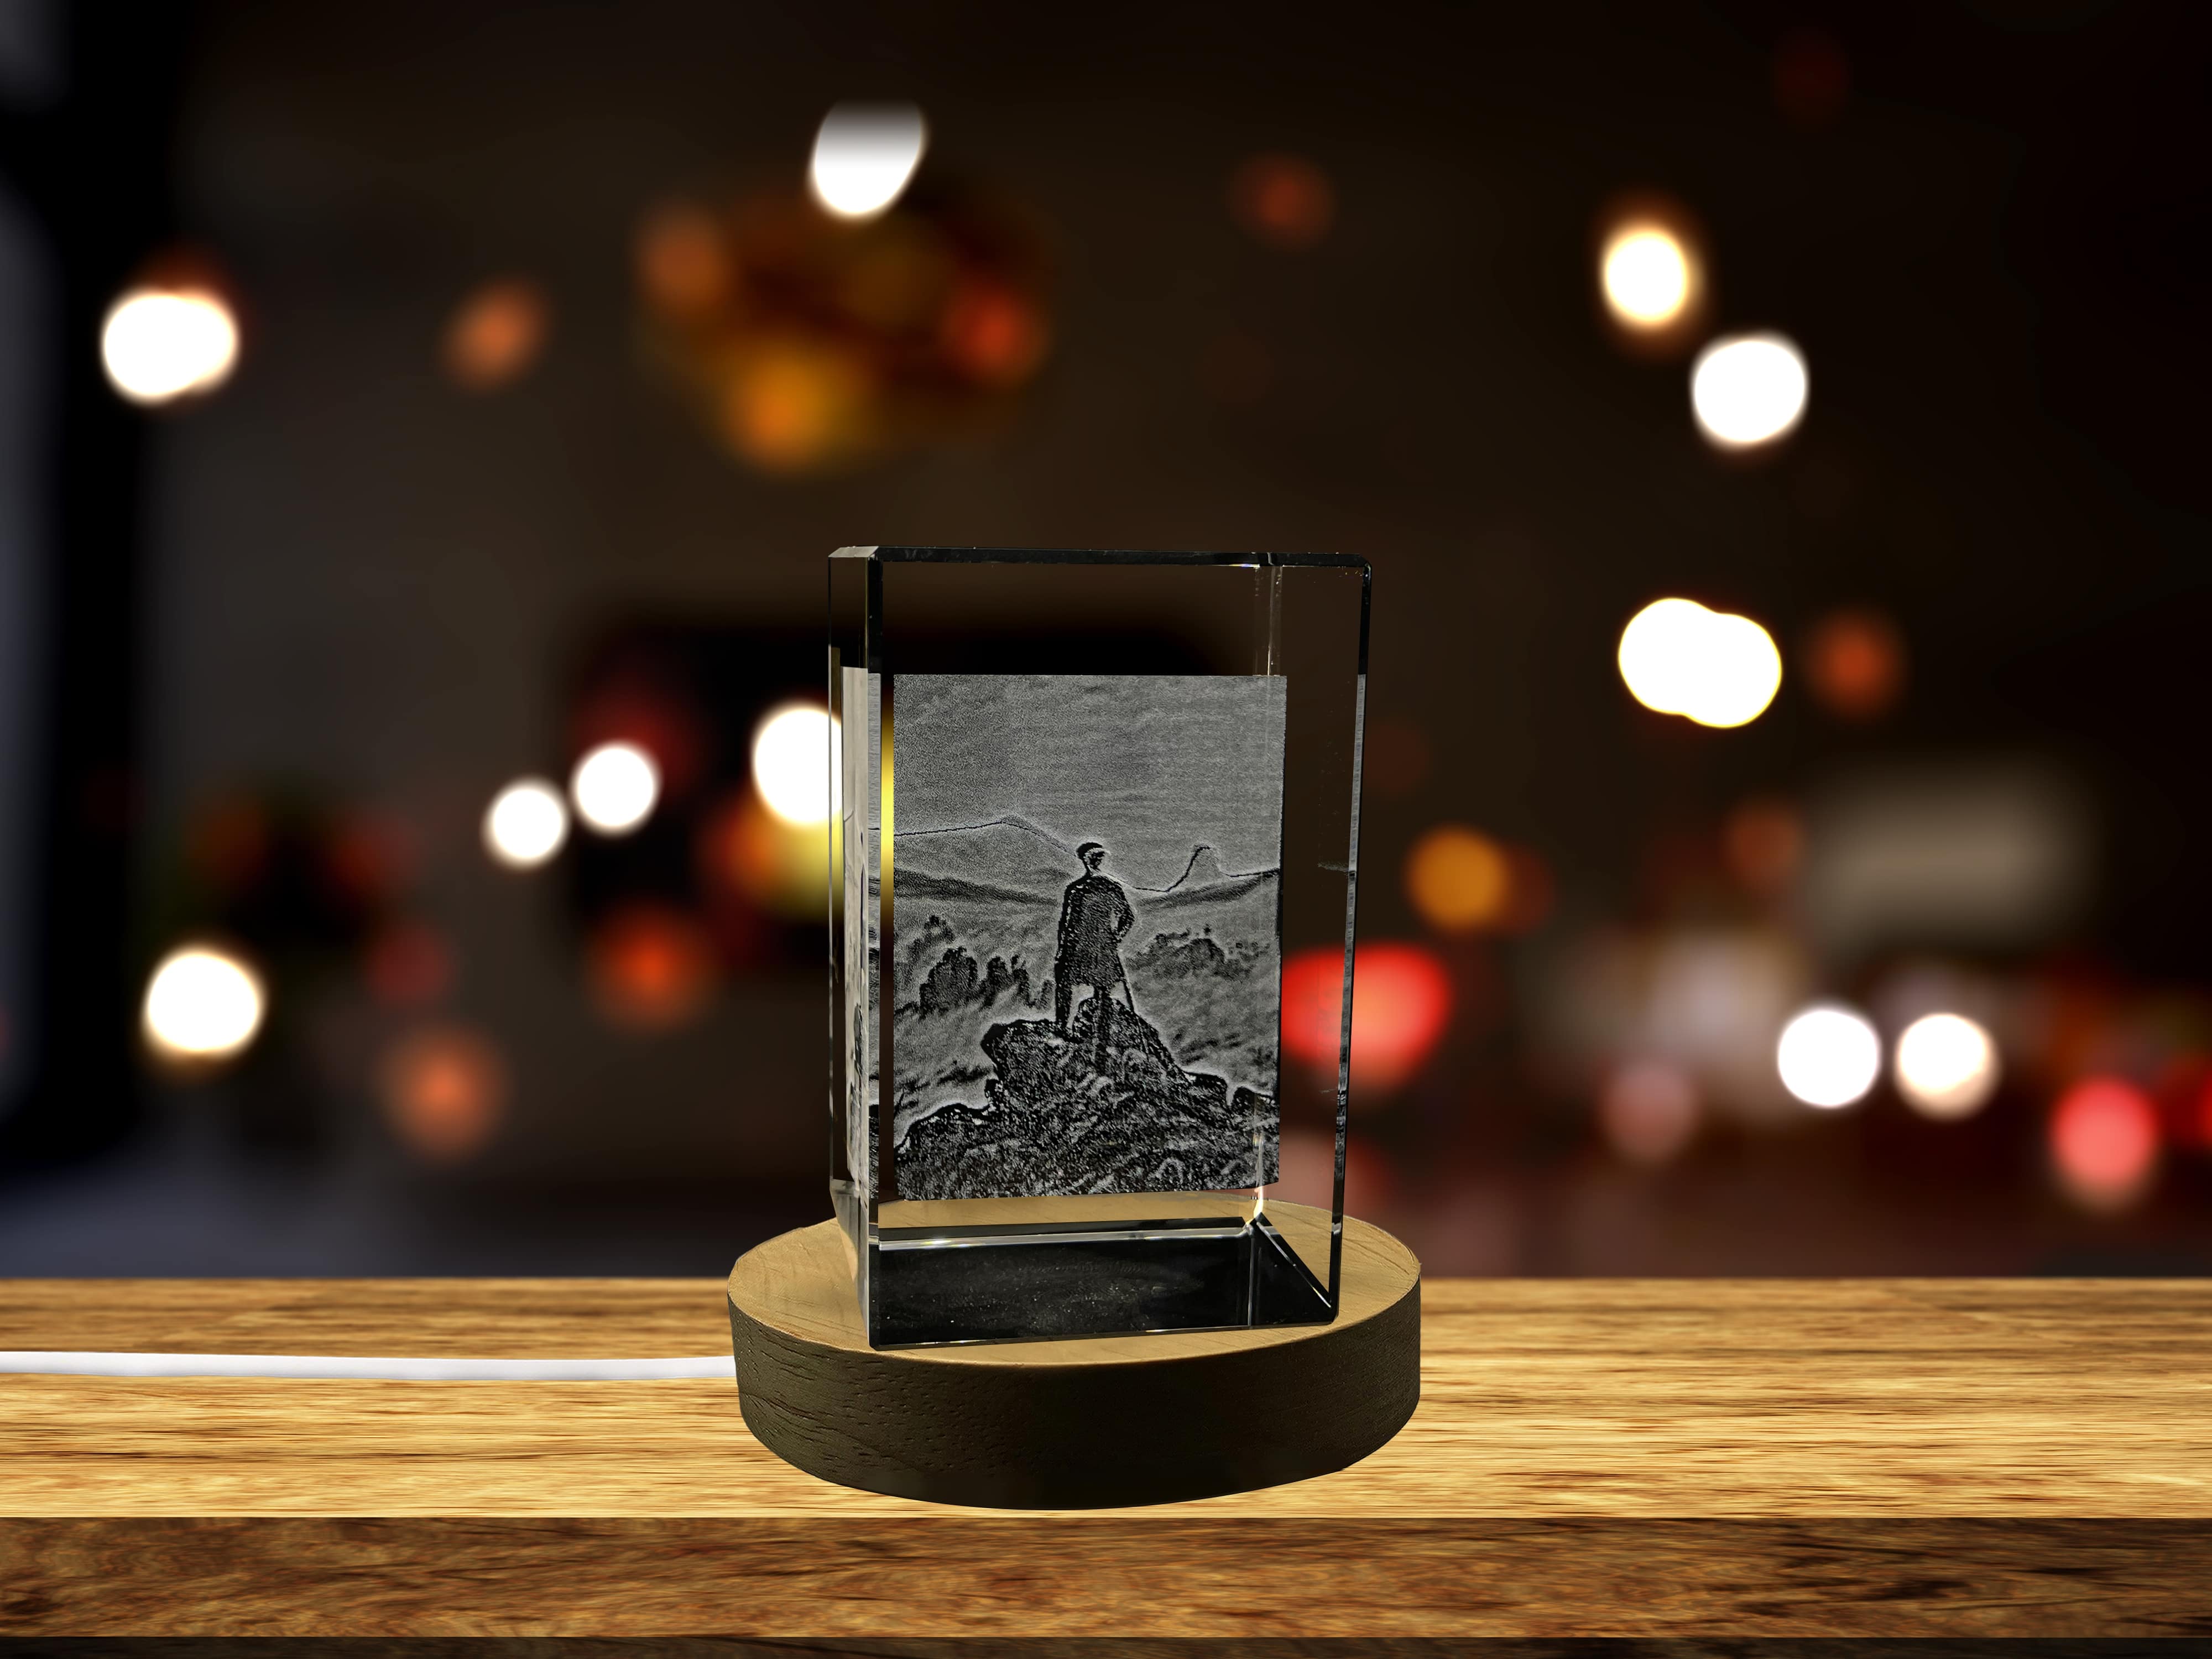 Wanderer above the Sea of Fog 3D Engraved Crystal Keepsake/Gift/Decor/Collectible/Souvenir A&B Crystal Collection